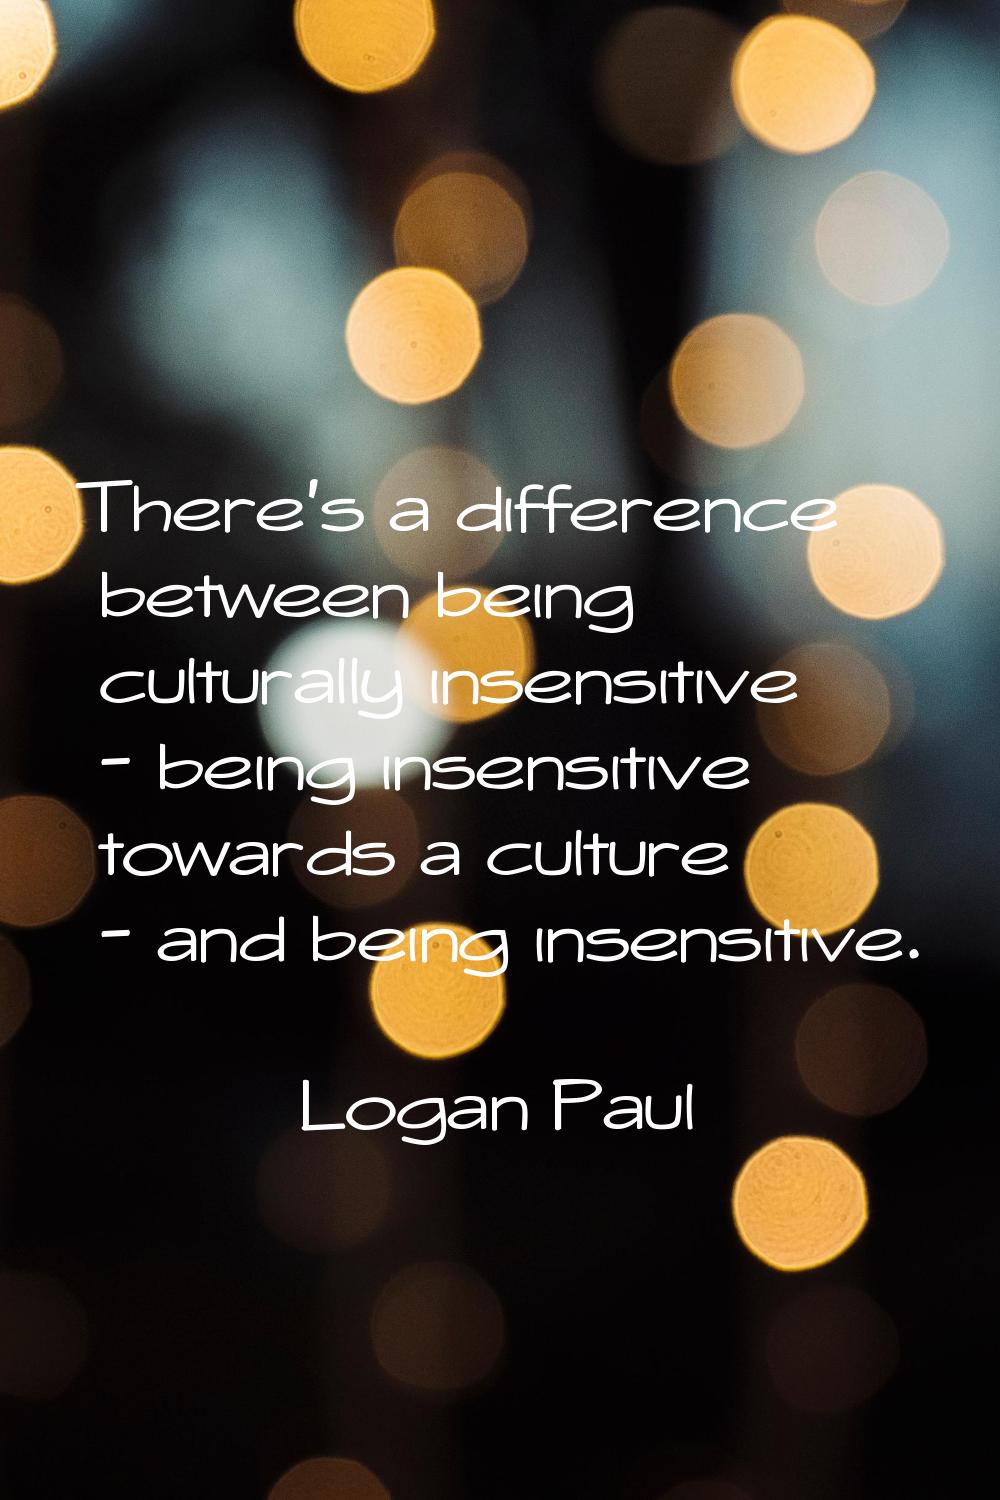 There's a difference between being culturally insensitive - being insensitive towards a culture - a